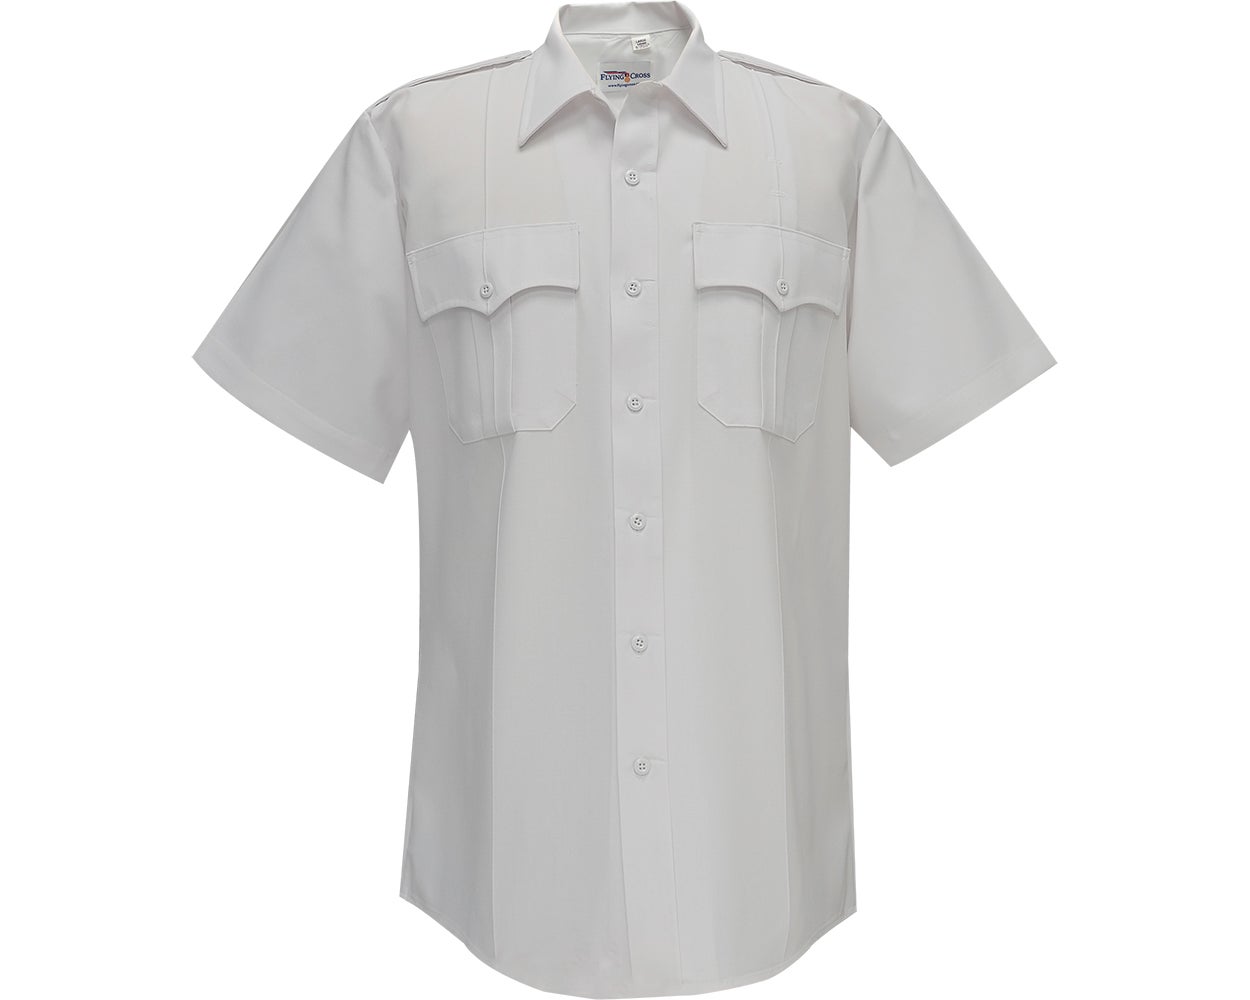 Flying Cross Command 100% Polyester Men's Short Sleeve Uniform Shirt 85R78 - Newest Products